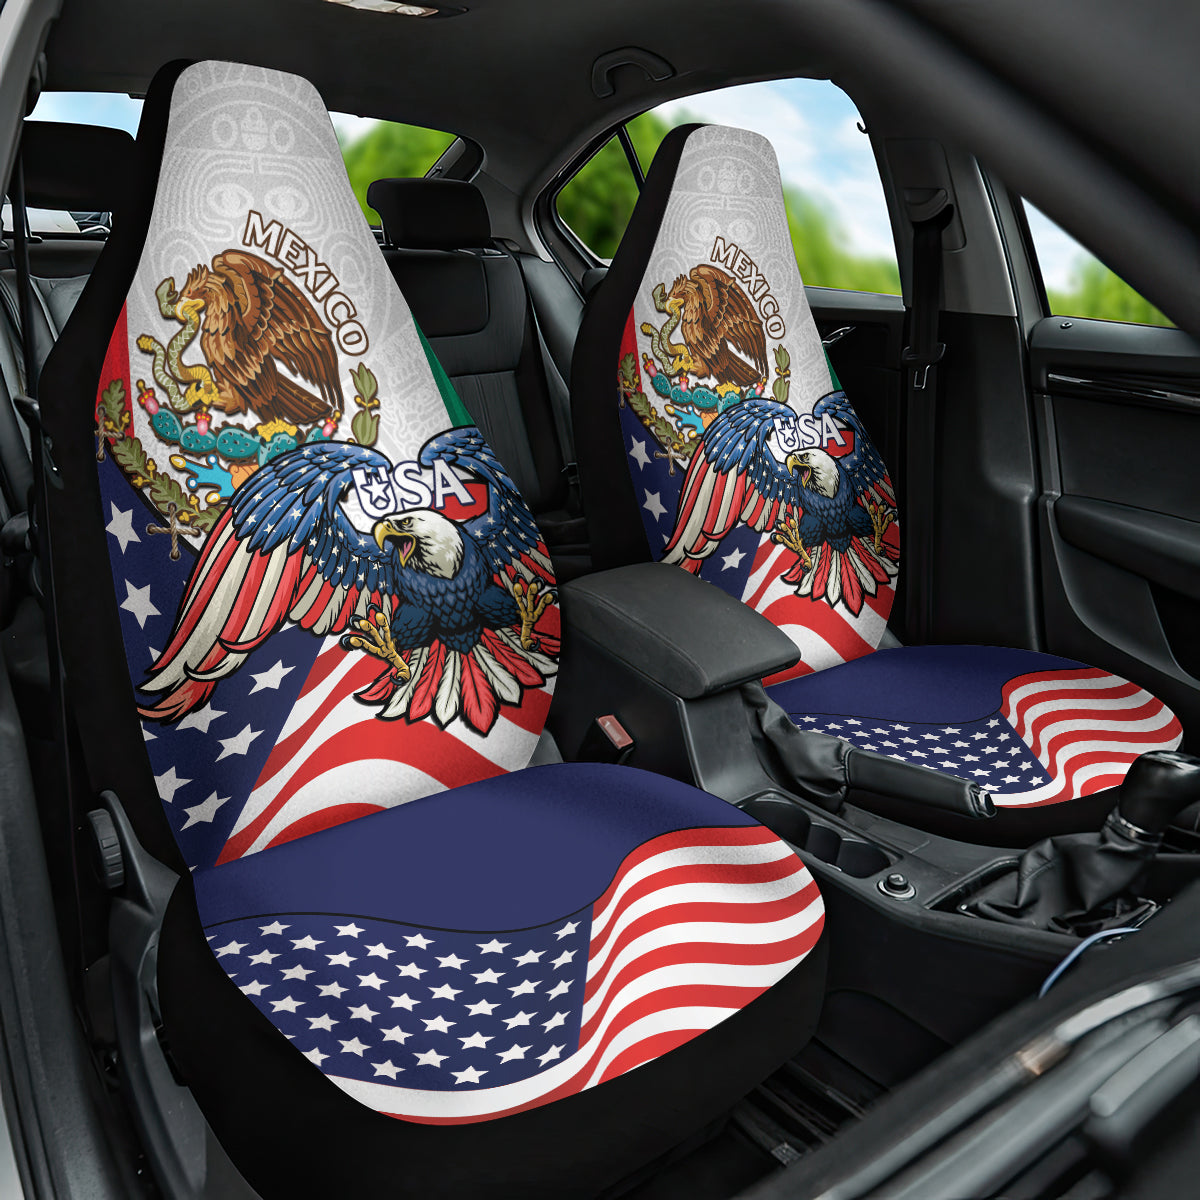 United States And Mexico Car Seat Cover USA Eagle With Mexican Aztec